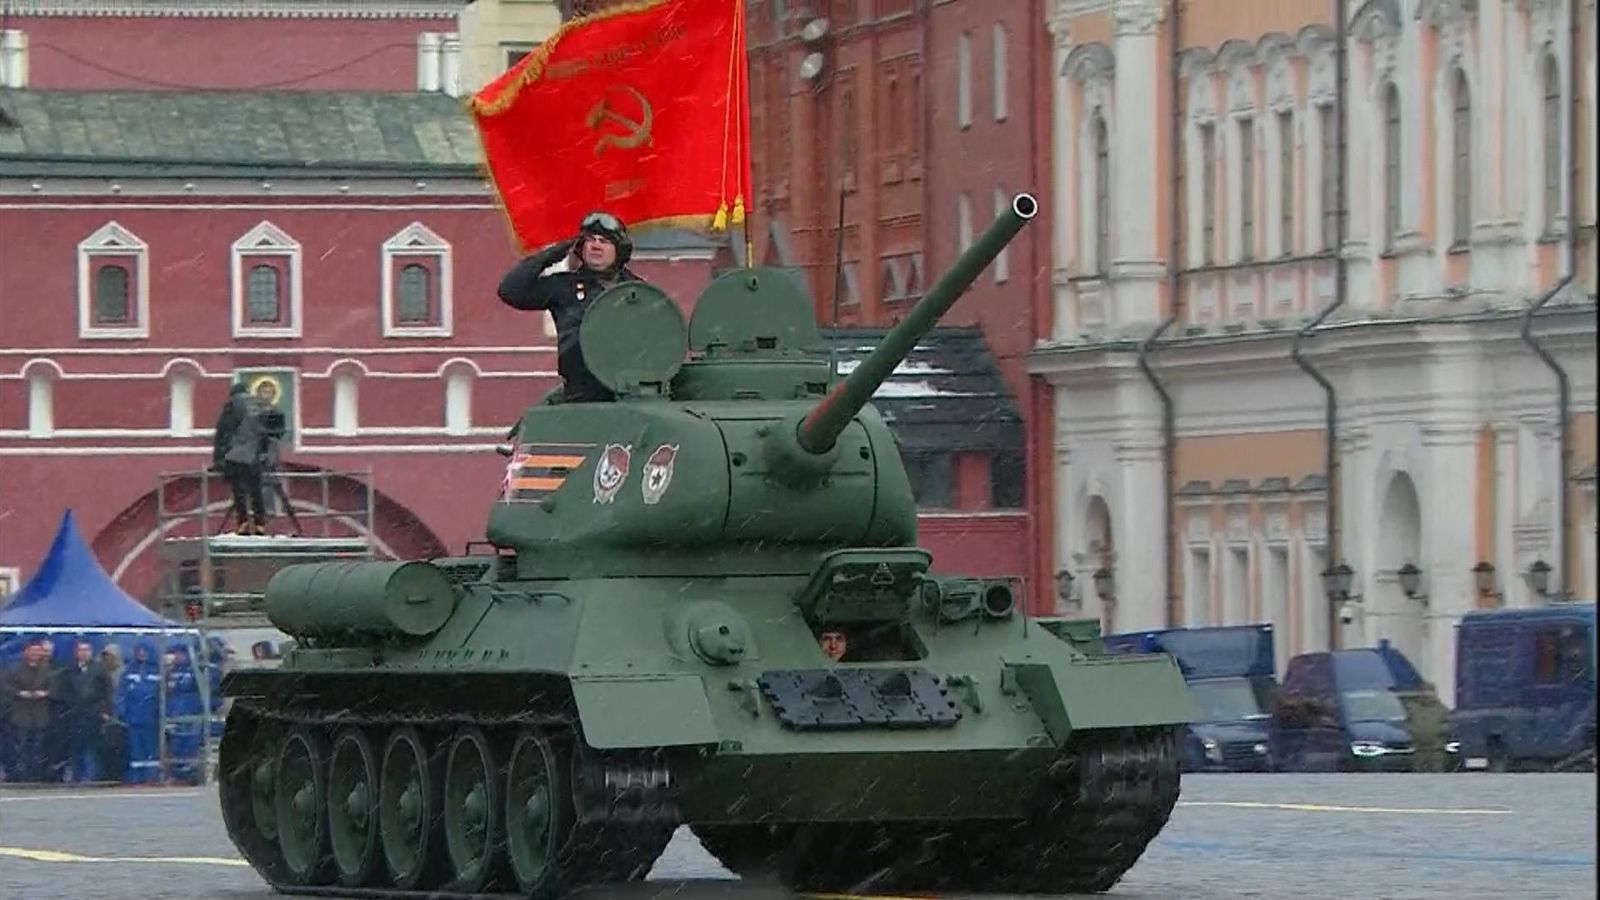 Russia Victory Day parade: Only one tank on display as Vladimir Putin says country is going through ‘difficult period’